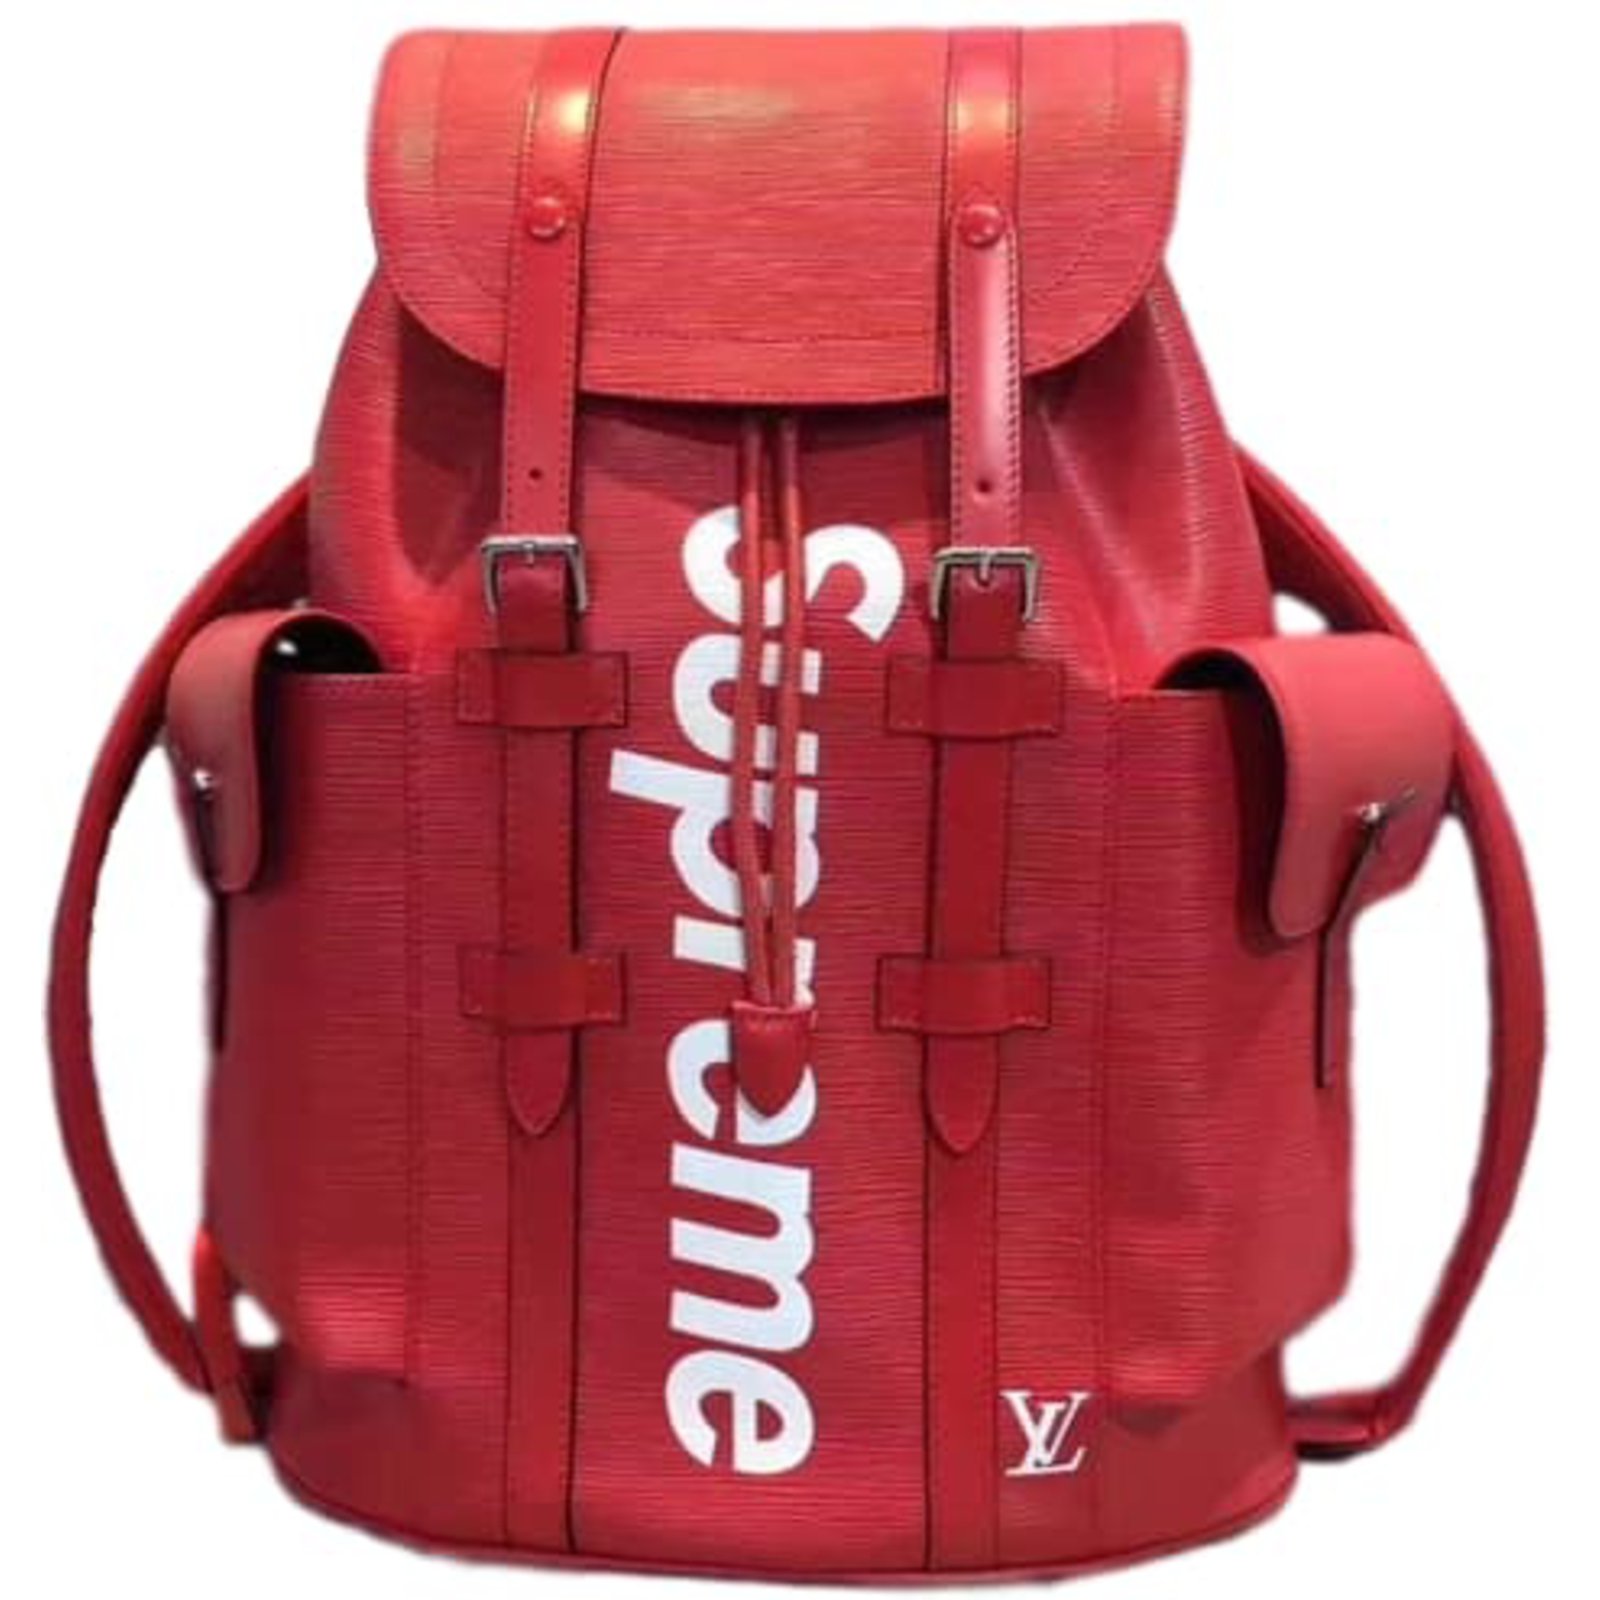 Louis Vuitton X Supreme Christopher Backpack Price | Confederated Tribes of the Umatilla Indian ...